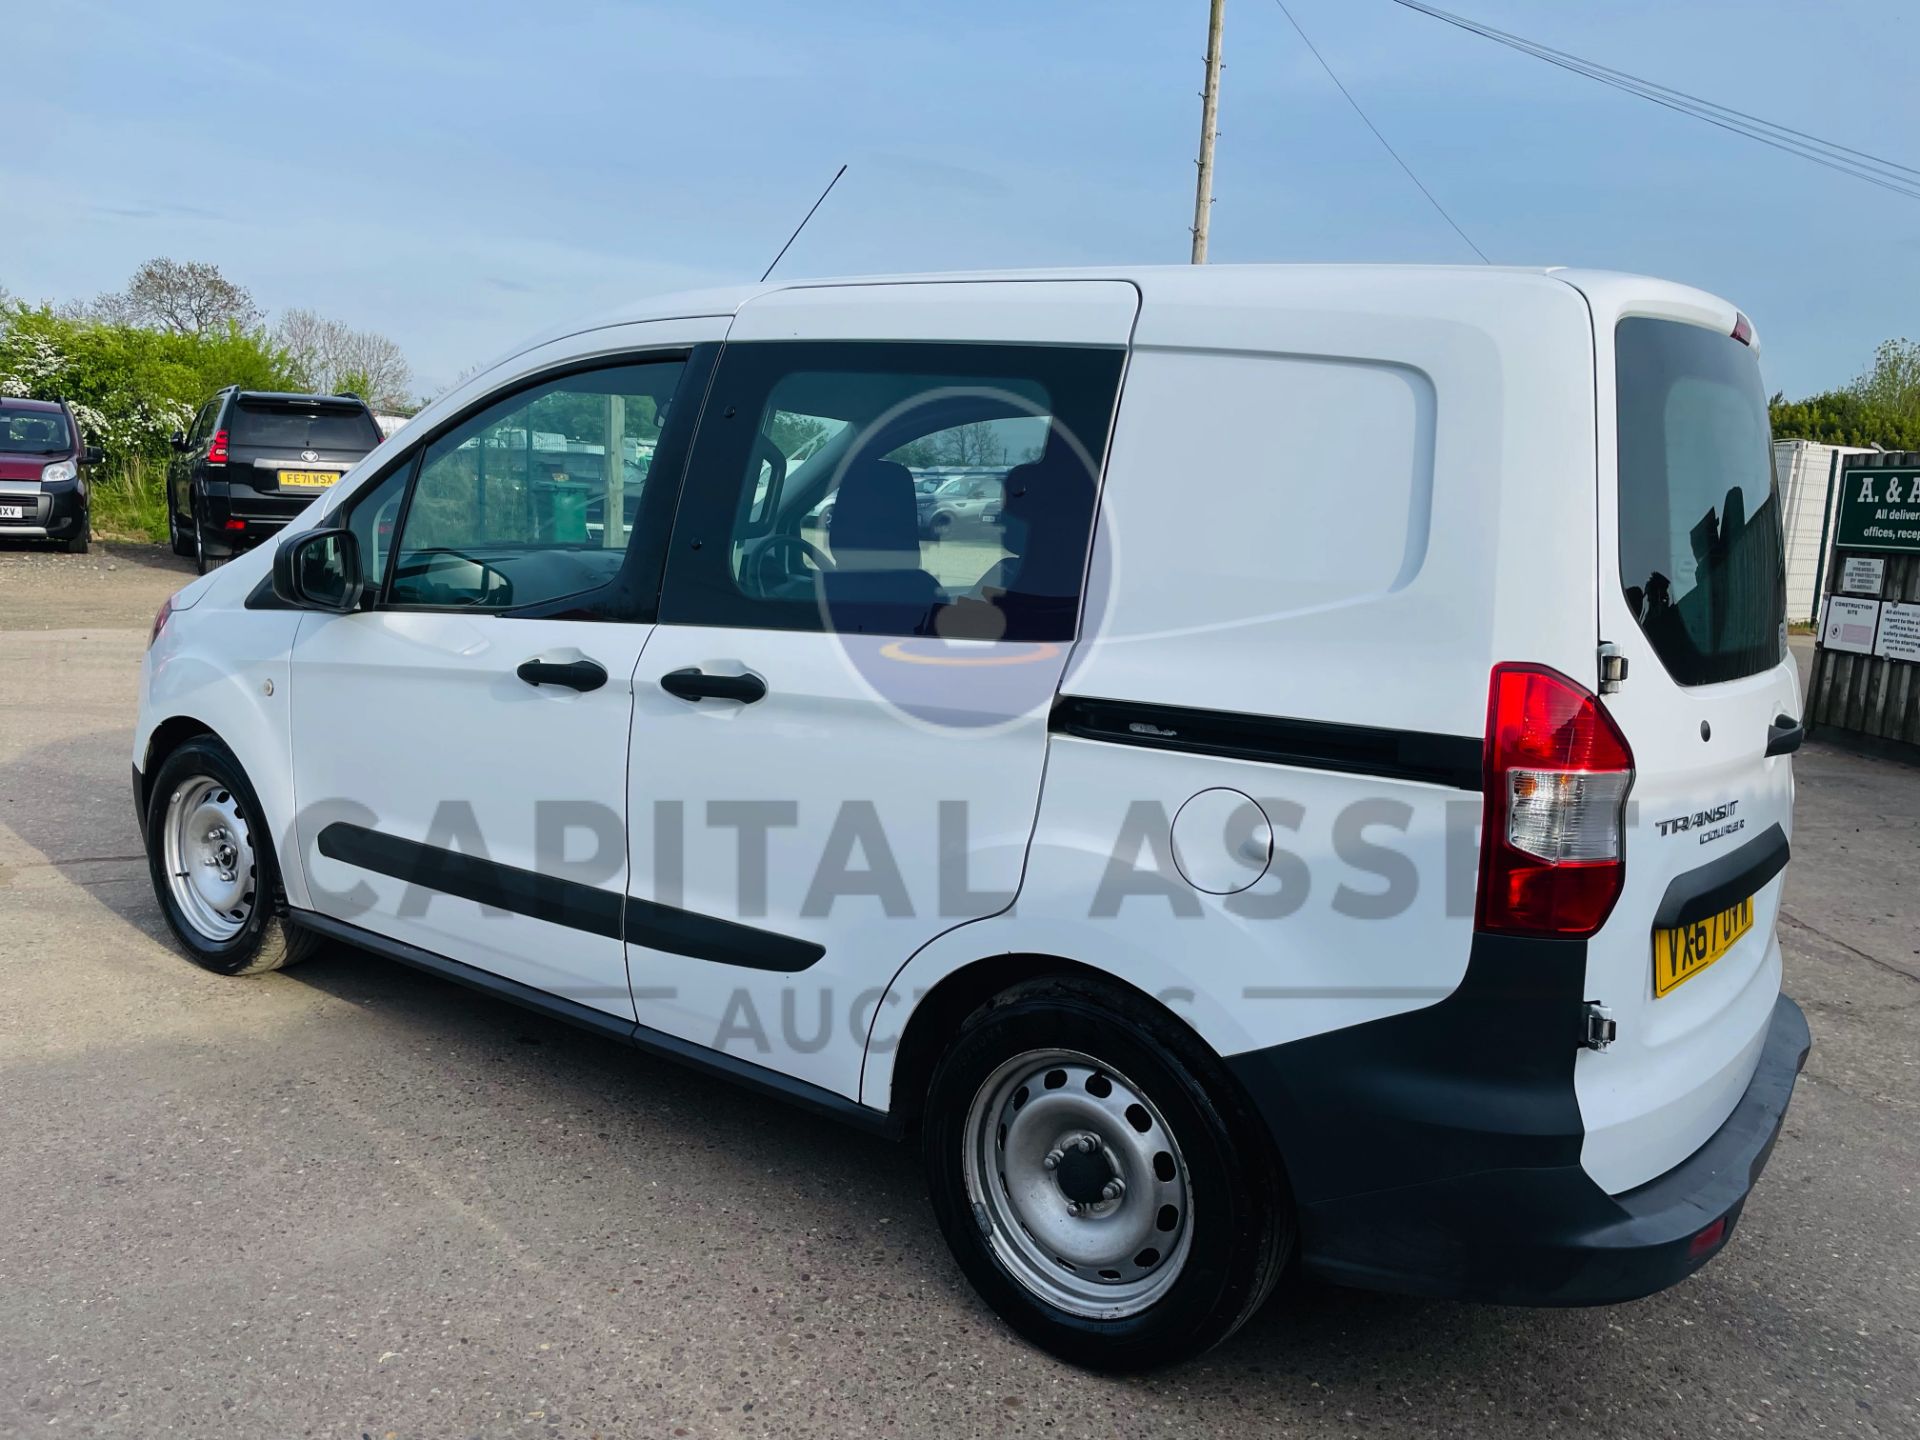 (ON SALE) FORD TRANSIT COURIER *5 SEATER CREW VAN* (2018-EURO 6) 1.5 TDCI -60 MPG+ (1 FORMER KEEPER) - Image 9 of 37